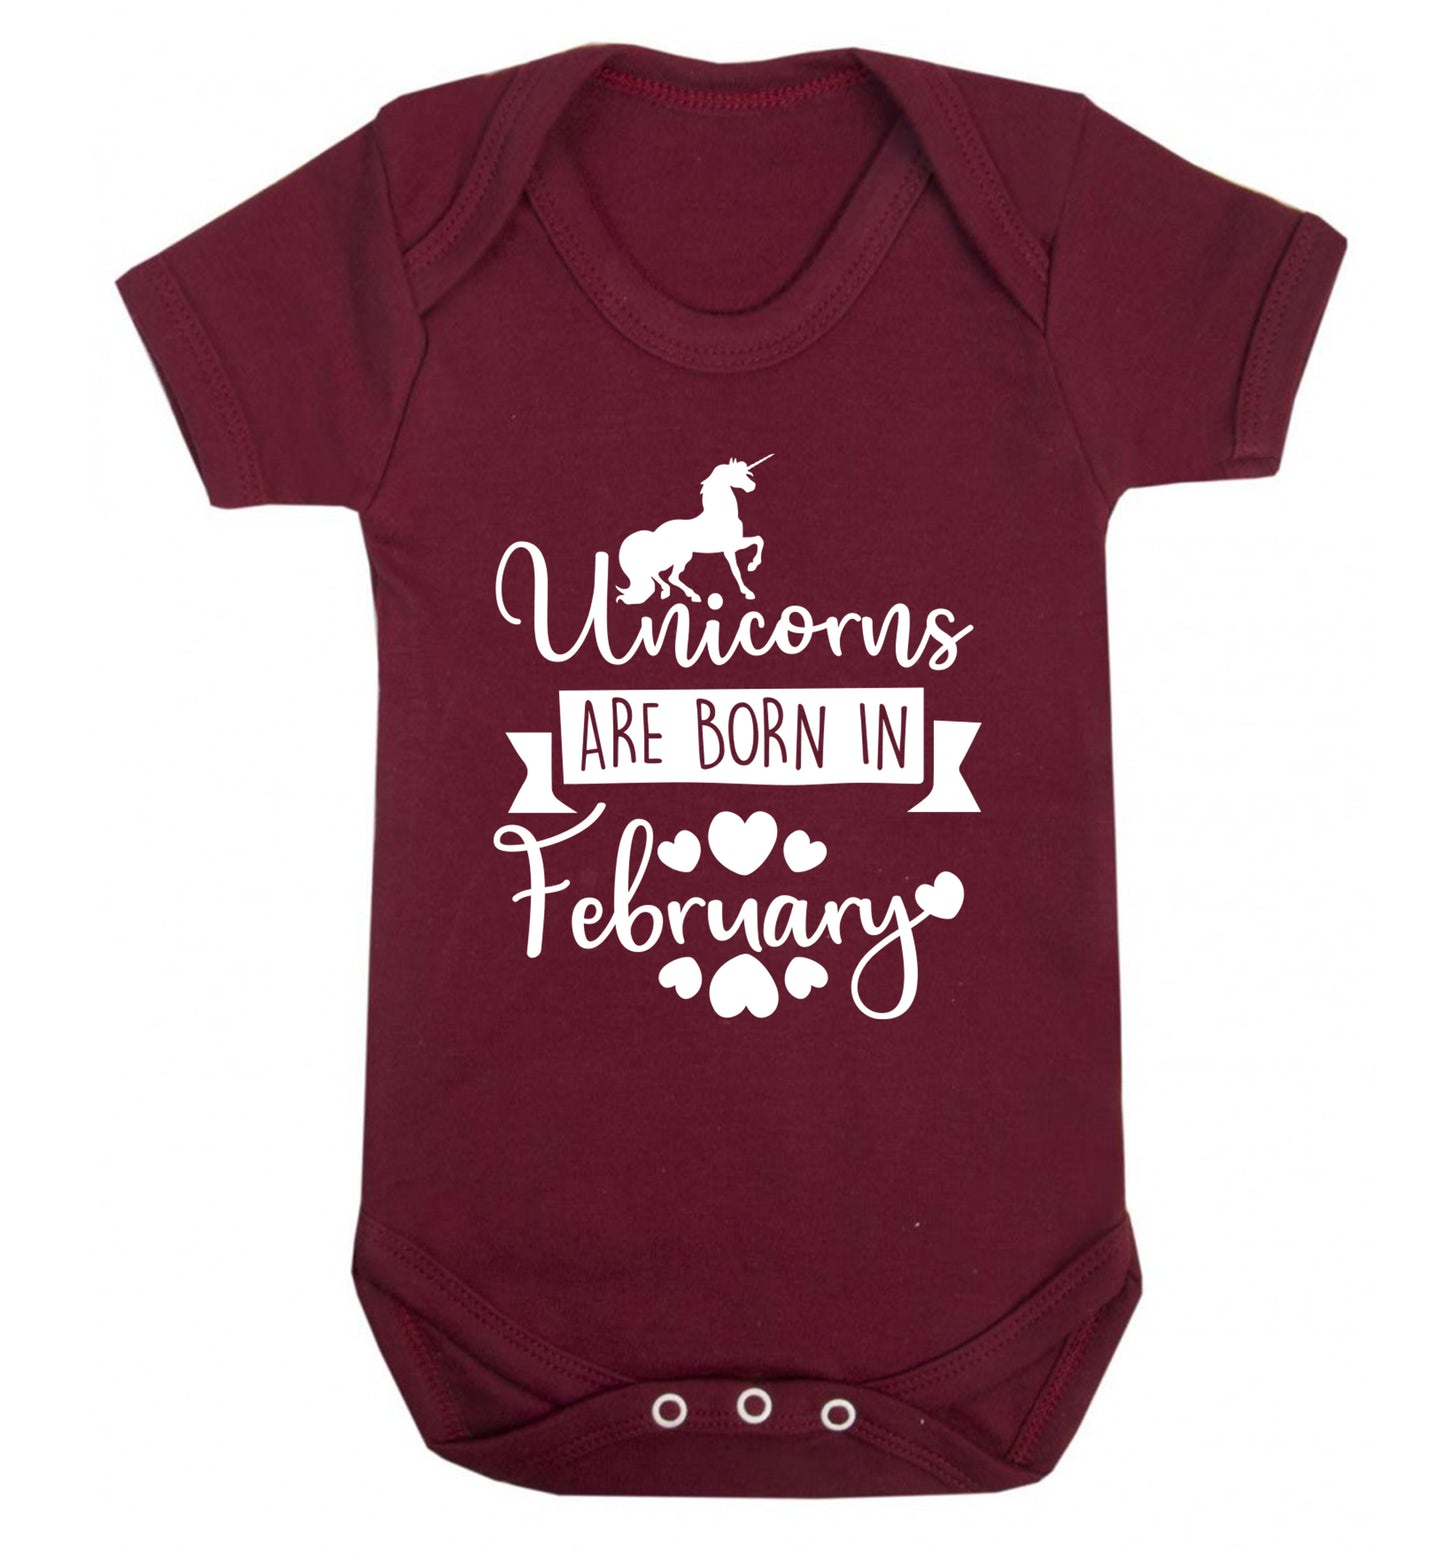 Unicorns are born in February Baby Vest maroon 18-24 months